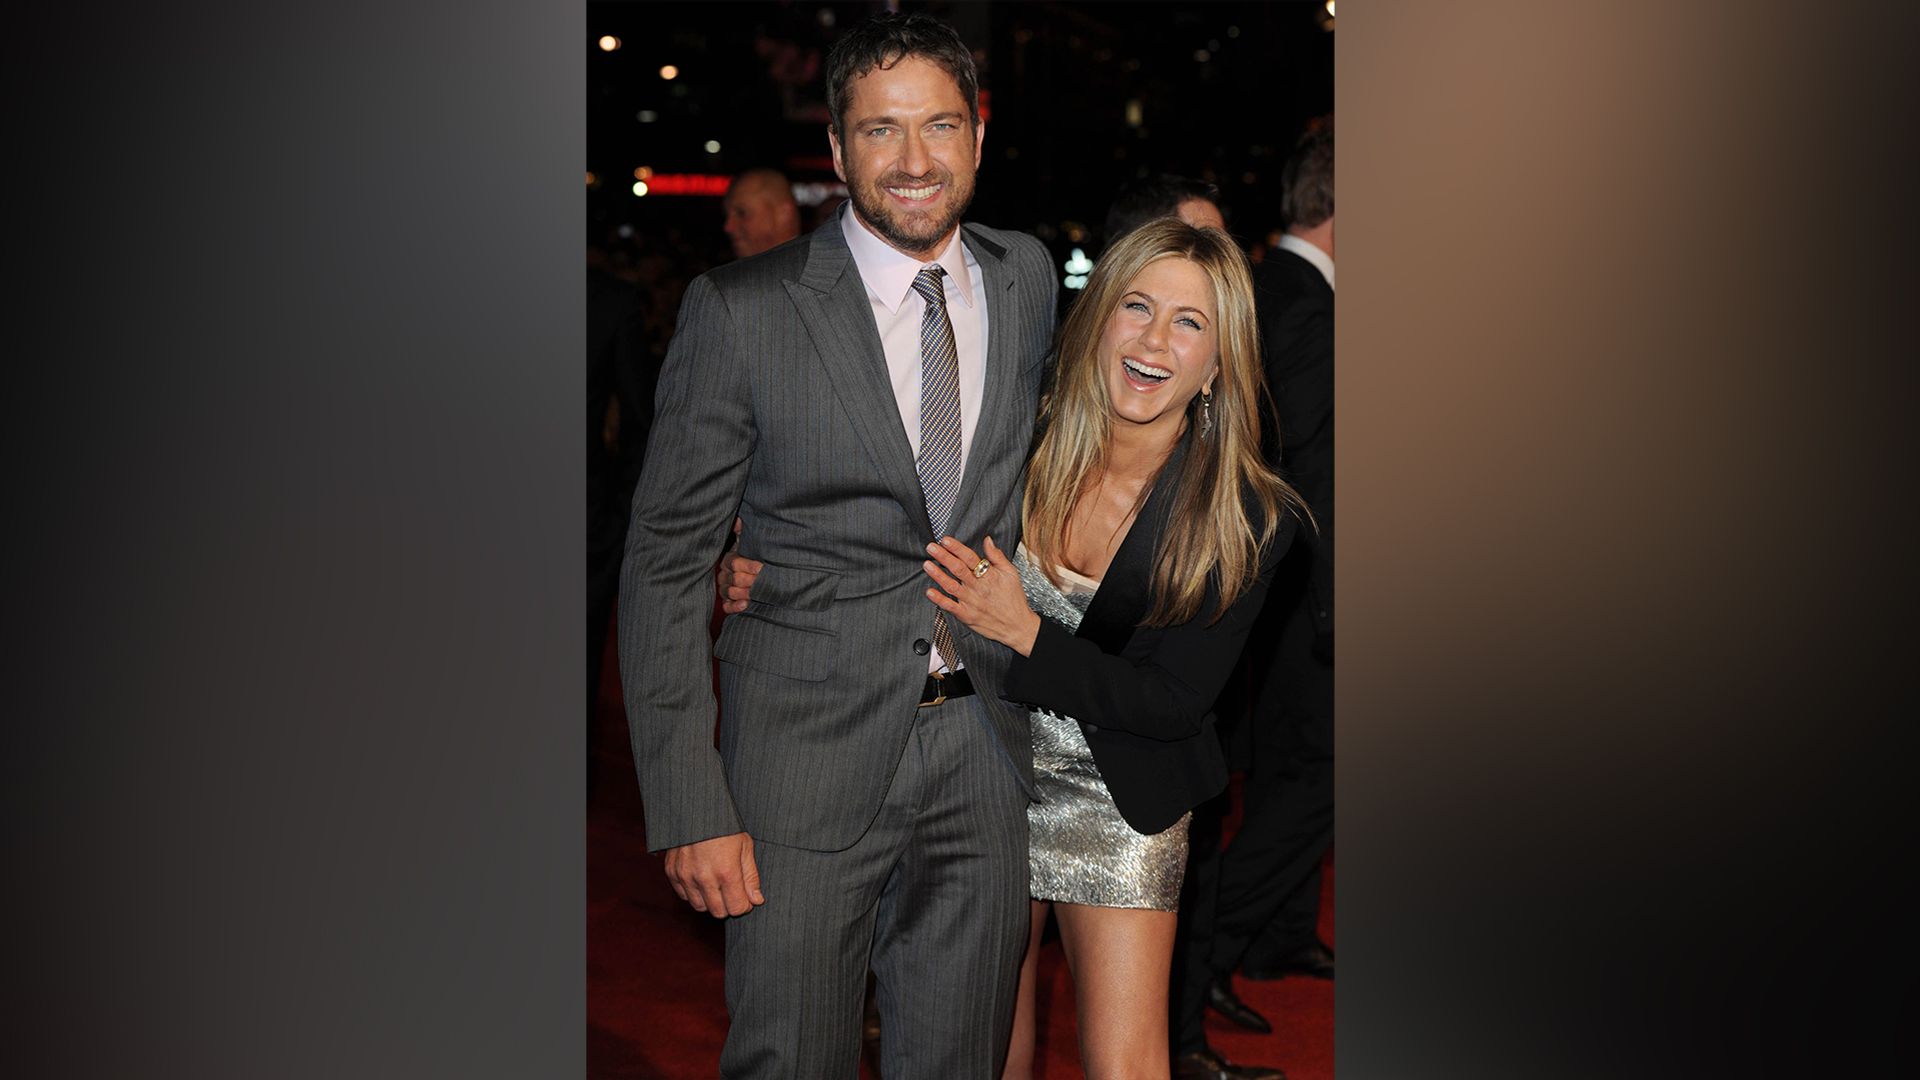 Jennifer Aniston and Gerard Butler had a brief relationship